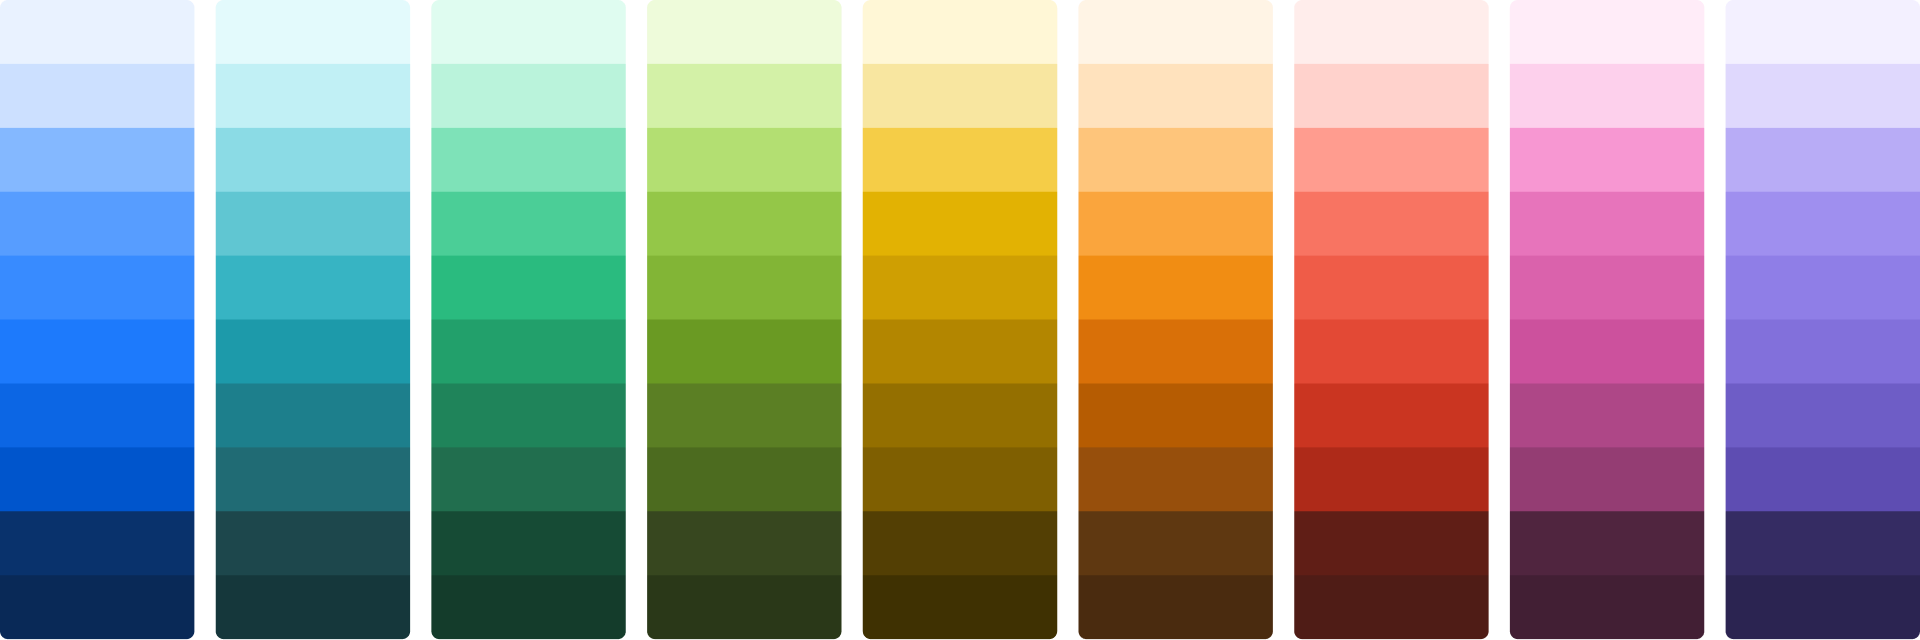 Color ramps for all saturated colors, which are blue, teal, green, lime, yellow, orange, red, magenta, and purple.